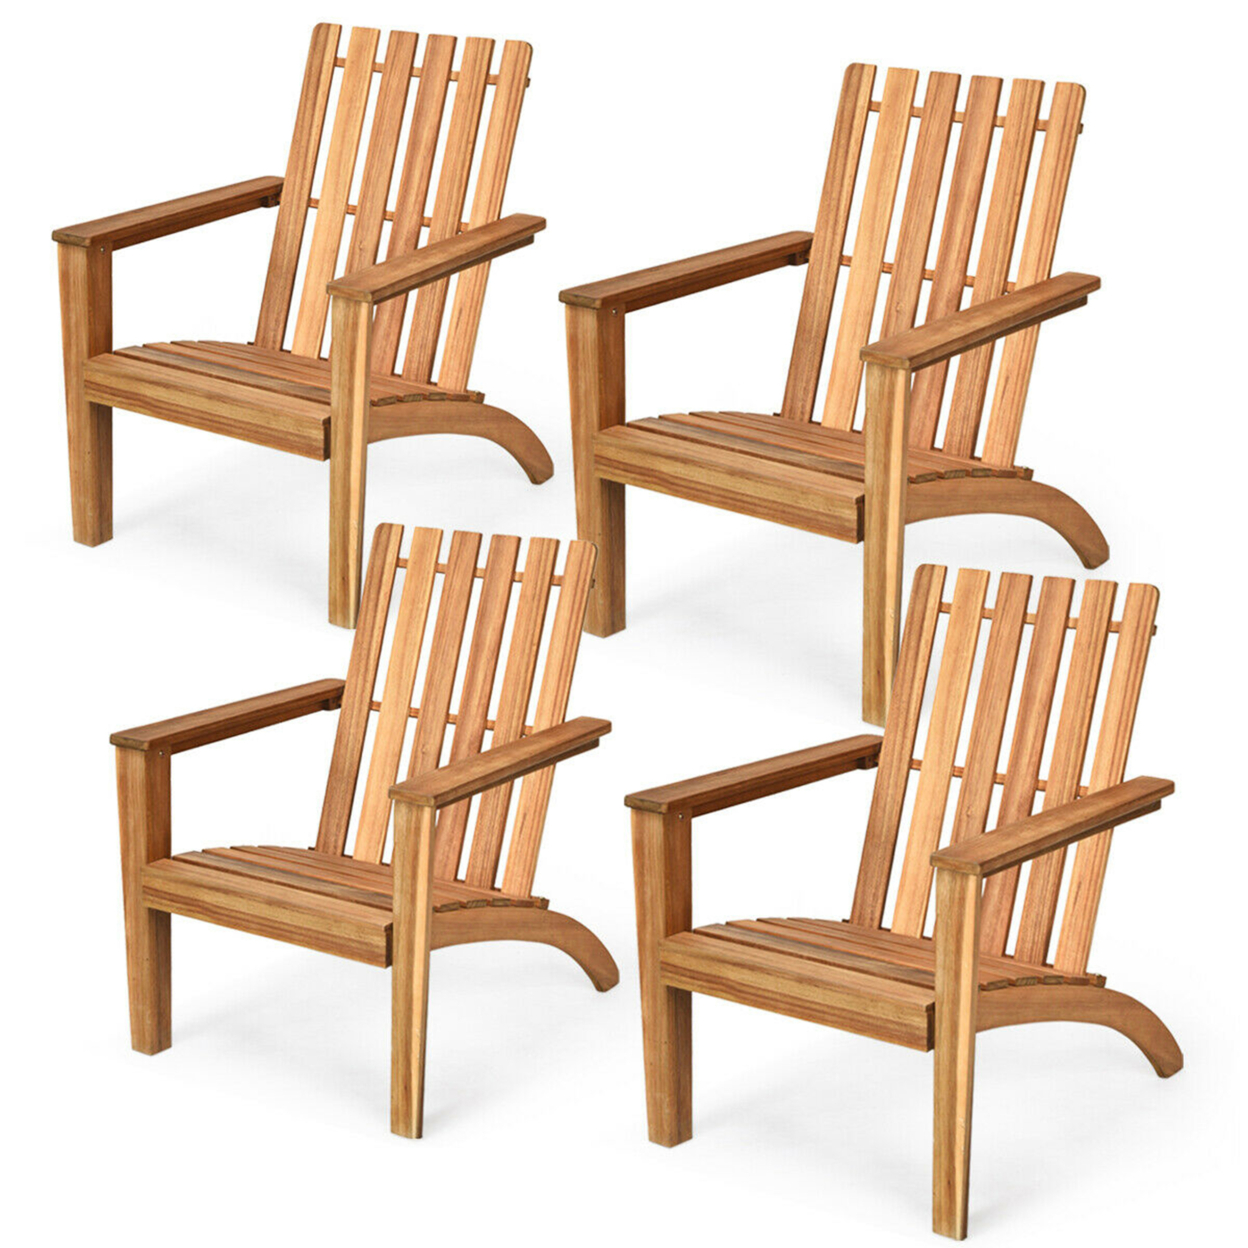 4PCS Outdoor Wooden Adirondack Chair Patio Lounge Chair W/ Armrest Natural